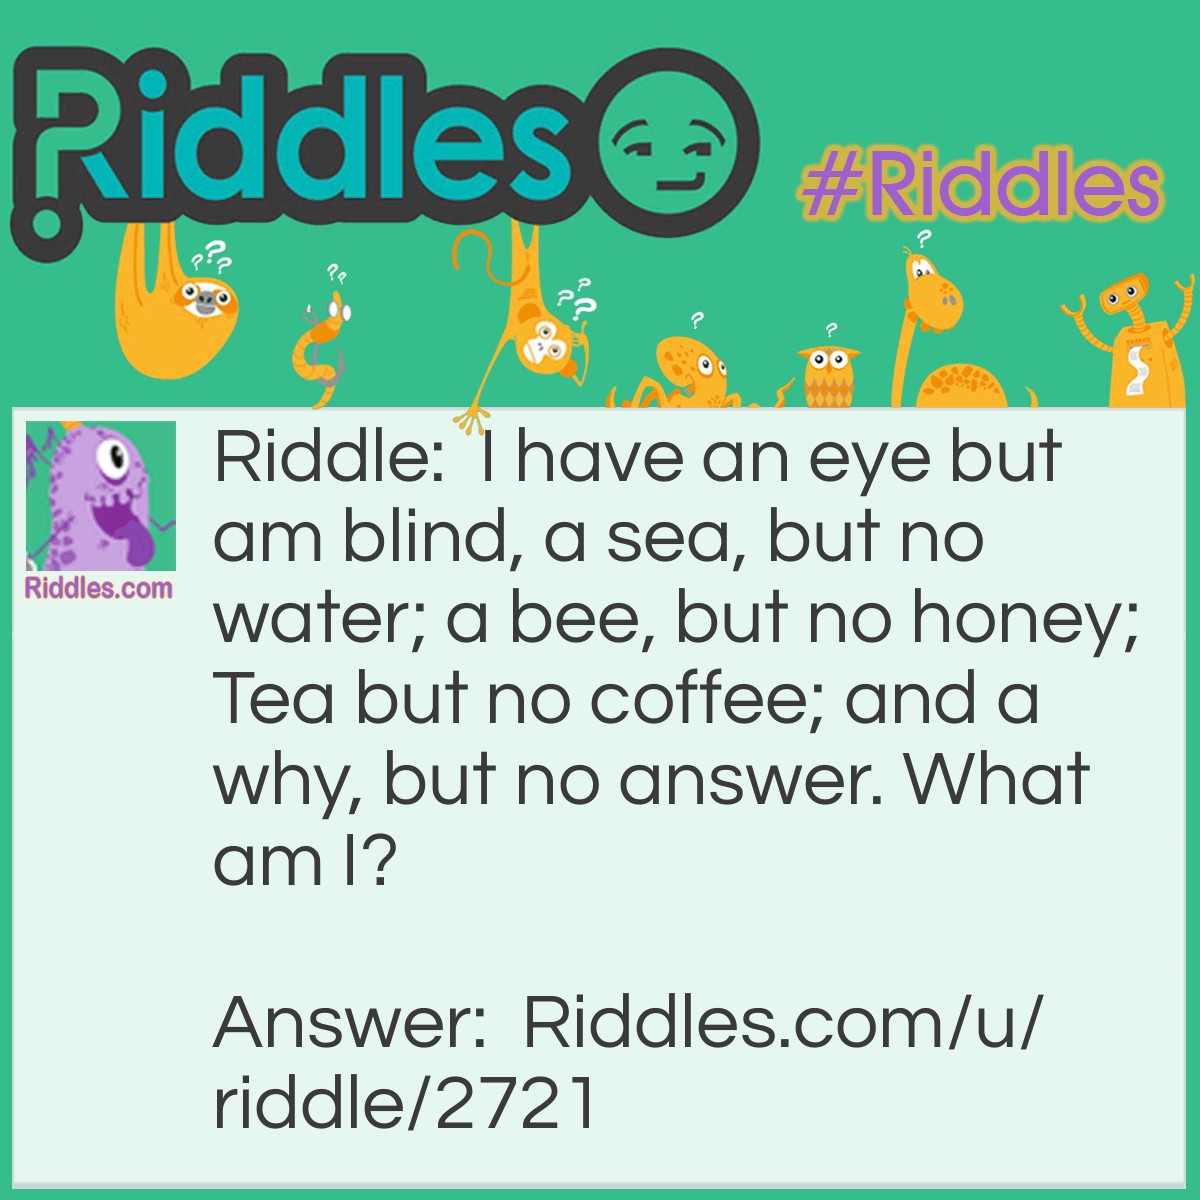 Riddle: I have an eye but am blind, a sea, but no water; a bee, but no honey; Tea but no coffee; and a why, but no answer. What am I? Answer: The alphabet.